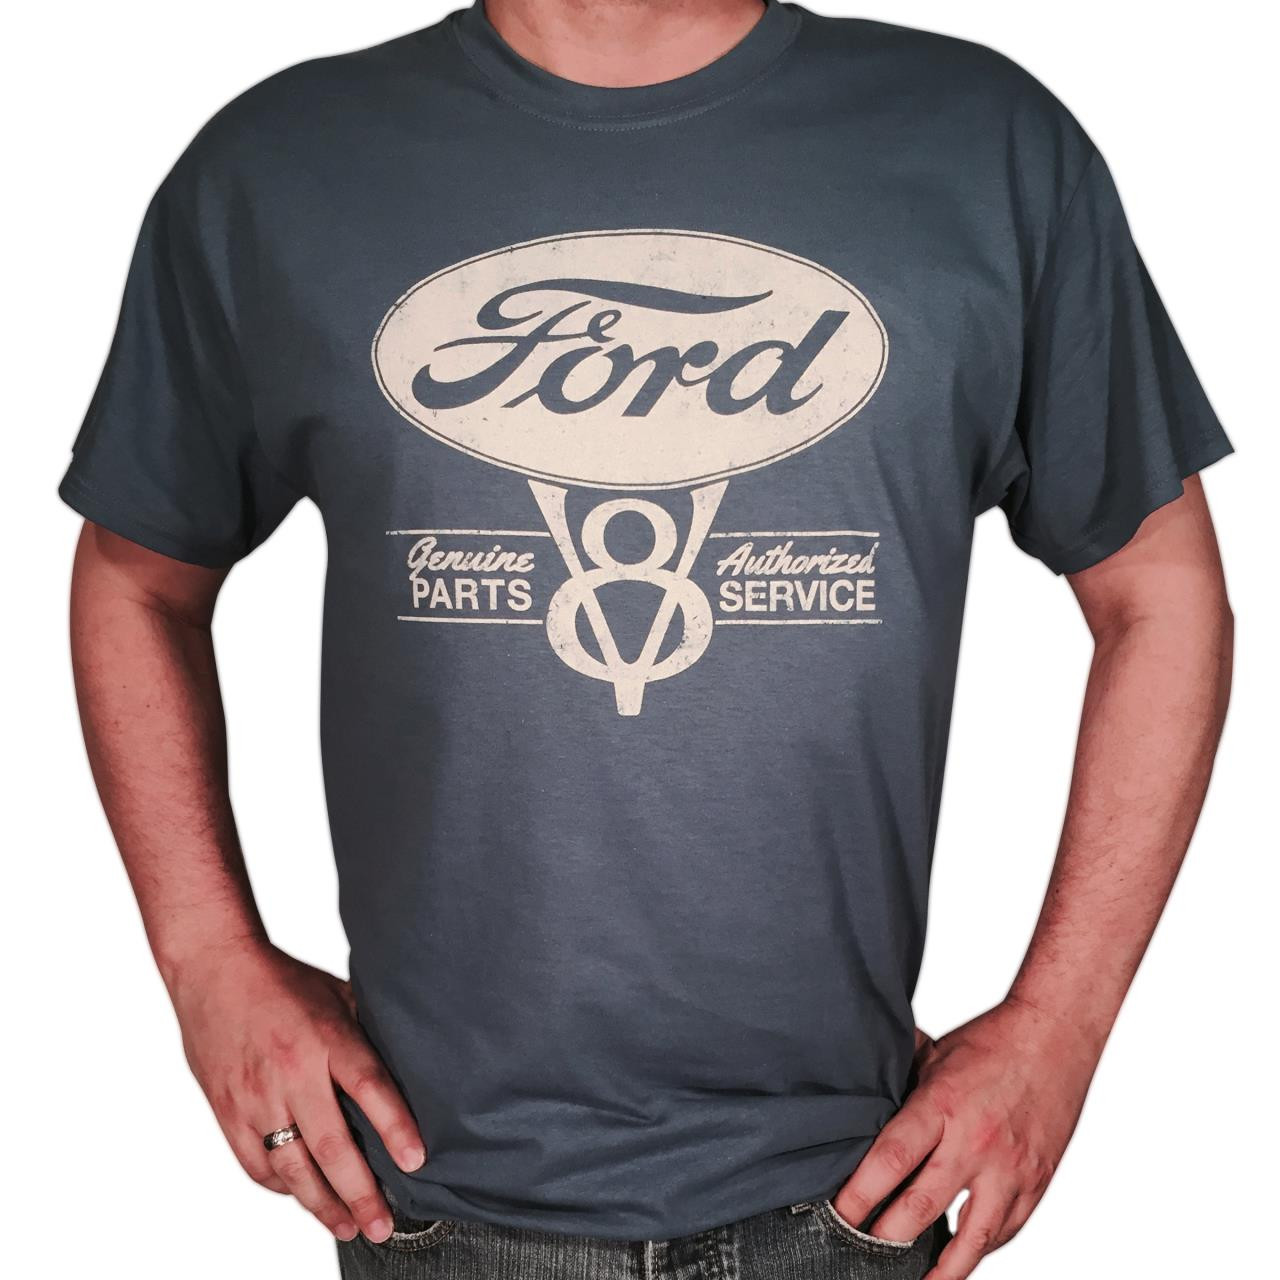 New Licensed Men's T-Shirt Genuine Ford Parts Sold Here 